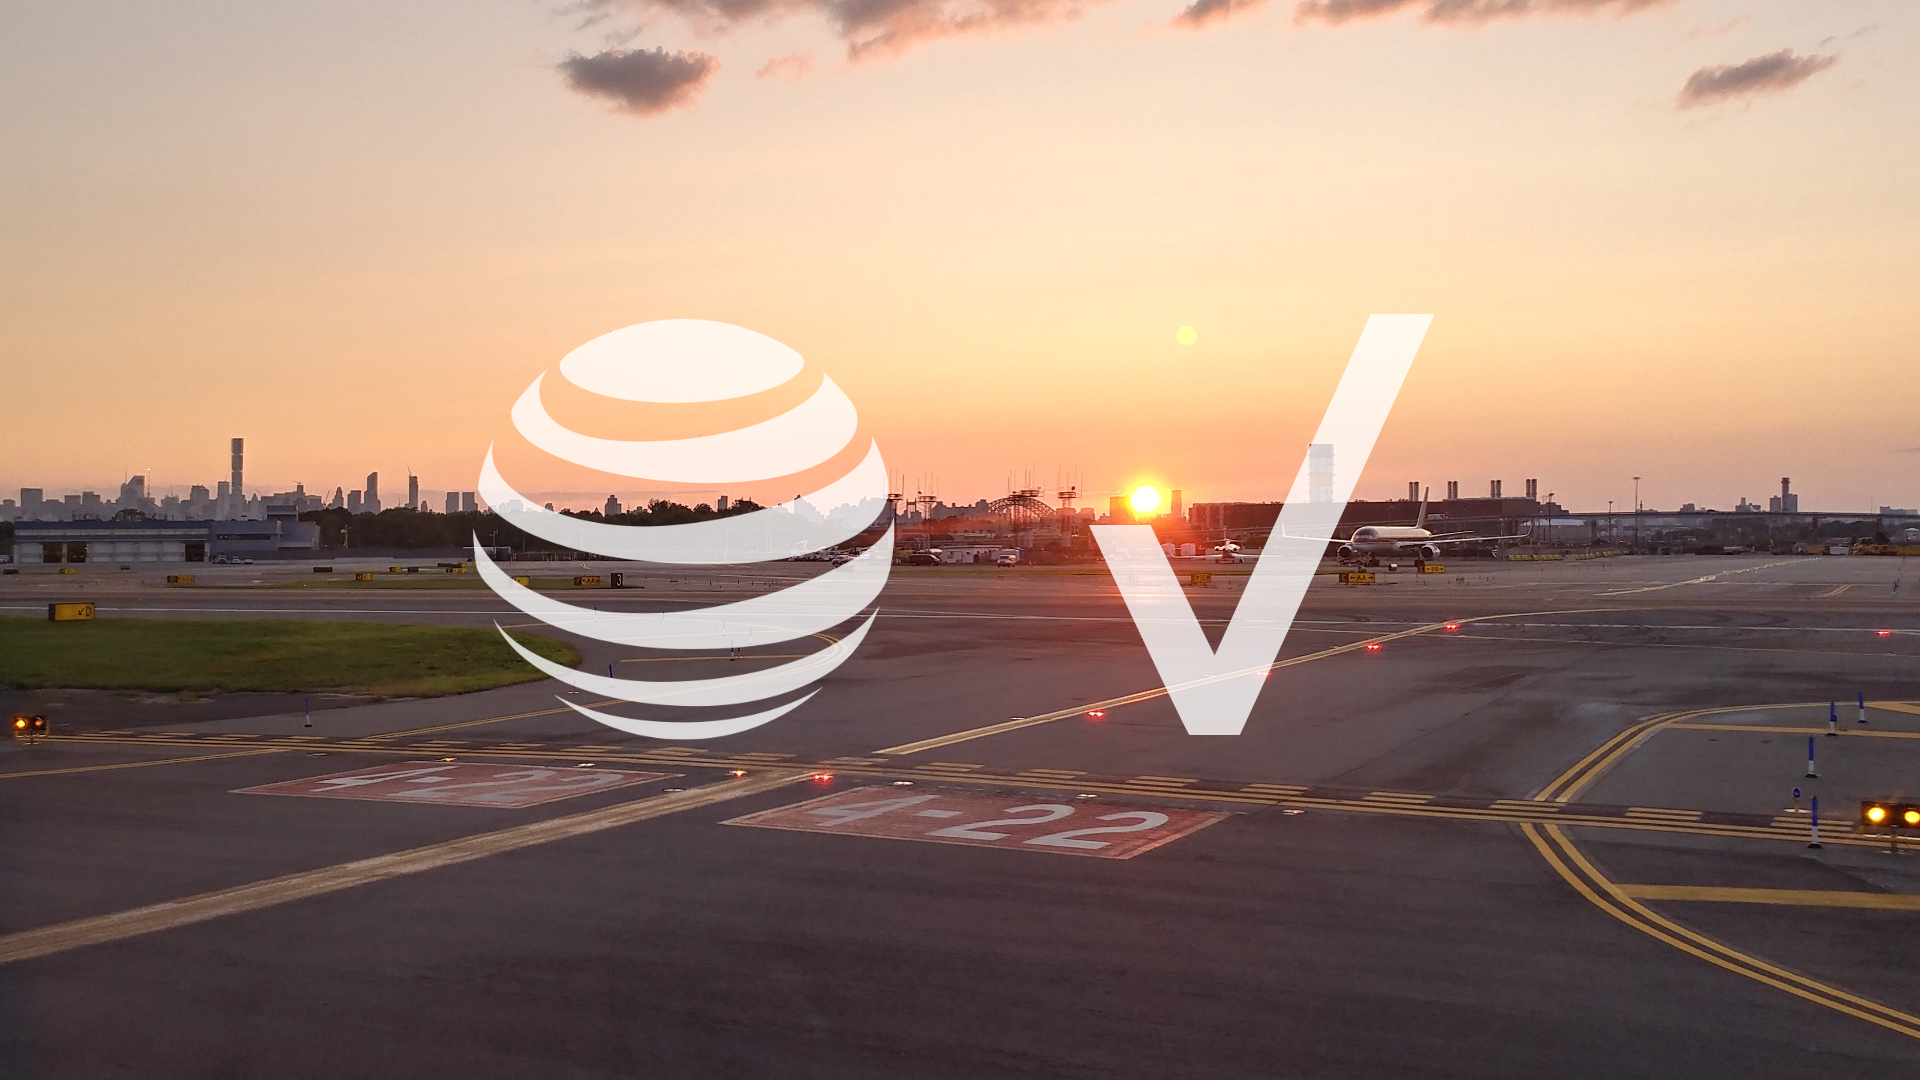 AT&T and Verizon Wireless logos overlayed on top of an airport runway